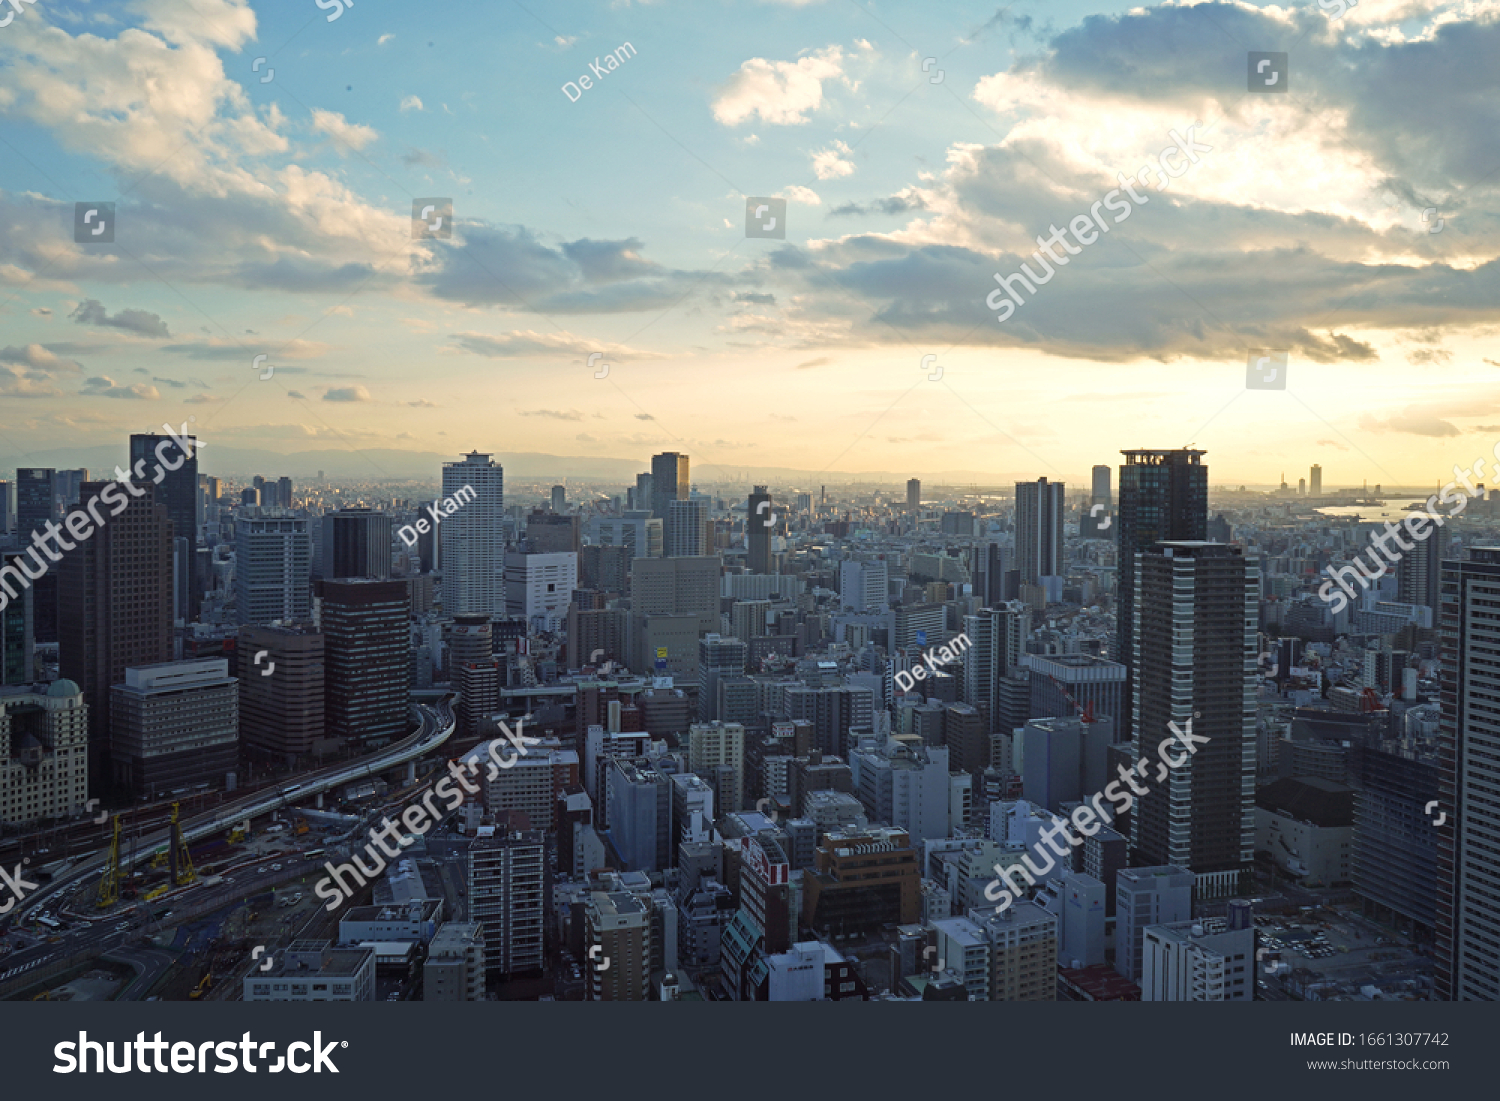 Osaka, Japan - January 9th, 2020: View of sunset in Osaka from Umeda Sky Building. Top view of vertical and dense city of Osaka. #1661307742